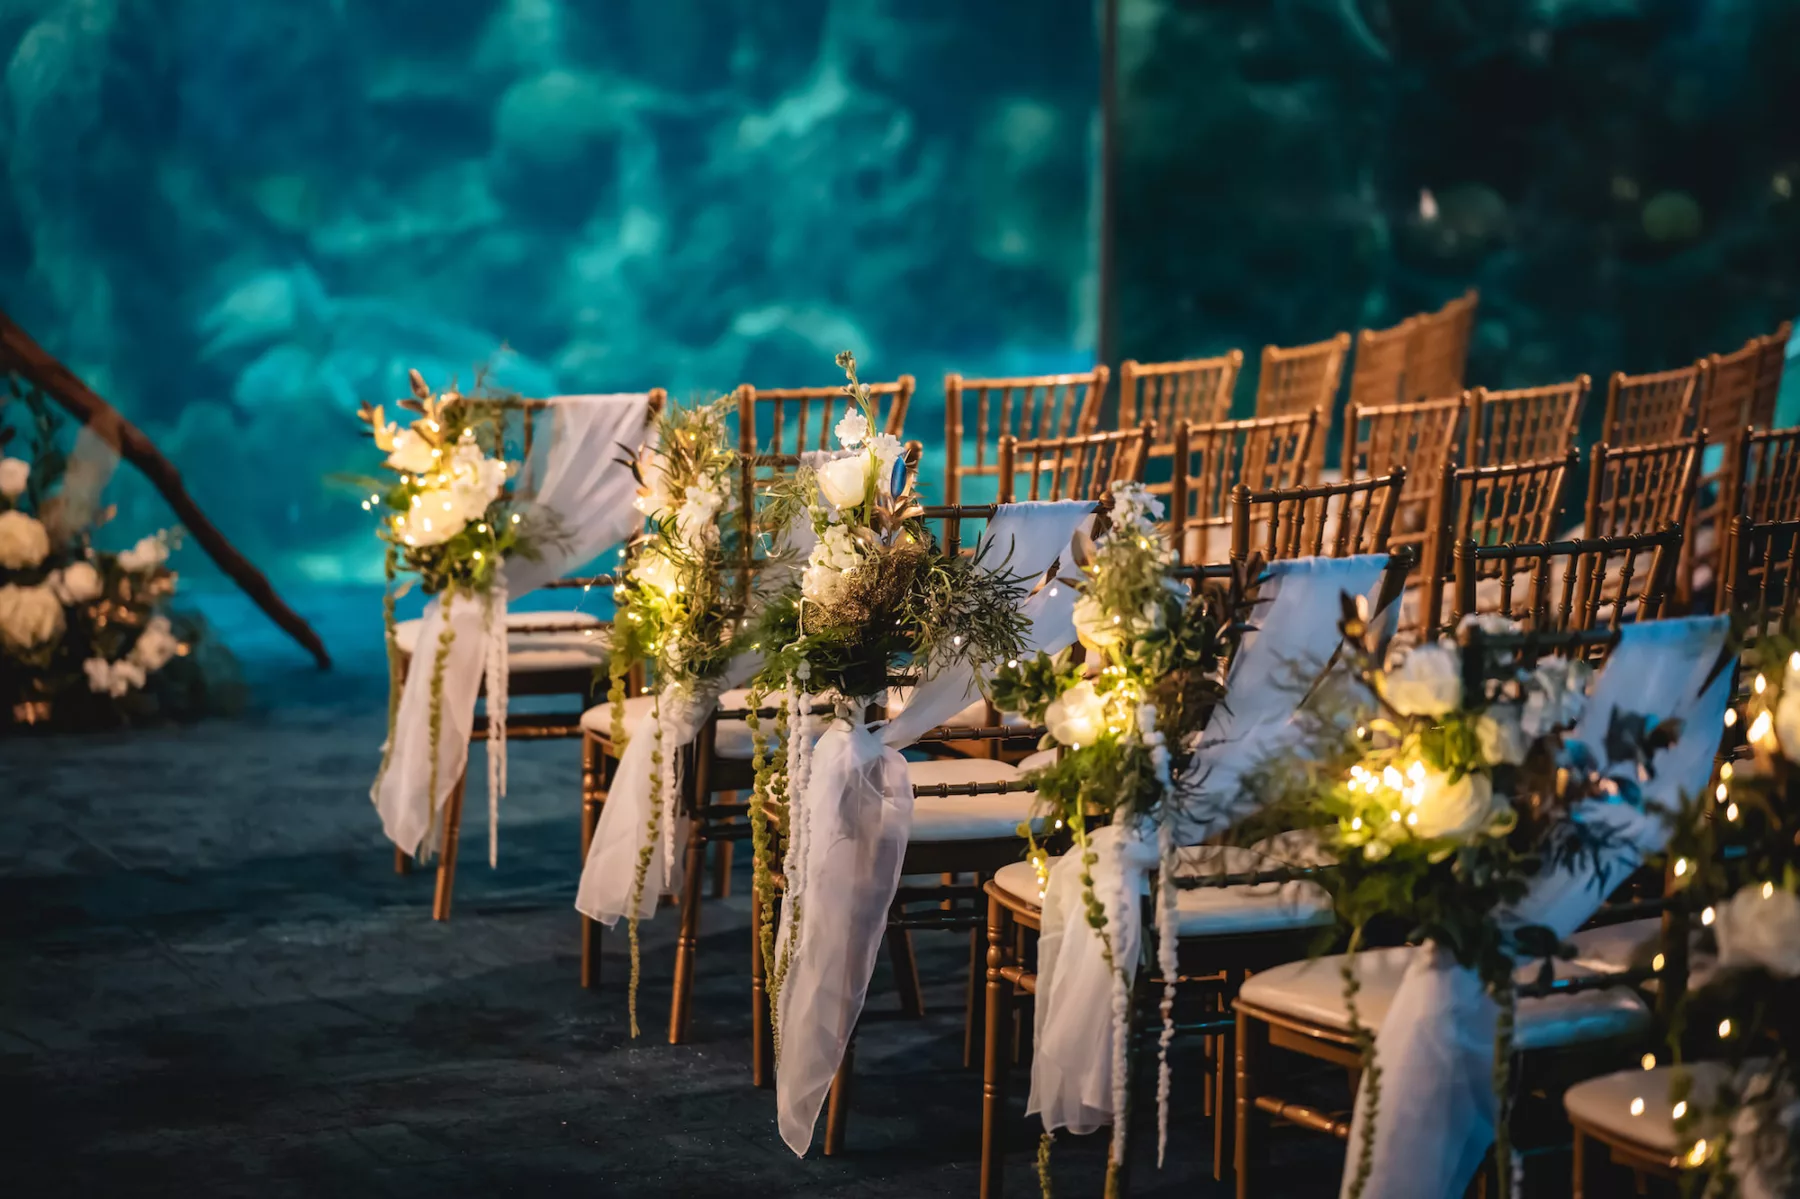 Elegant Gold Chiavari Chairs with White Drapery, Wisteria, Roses, and Fairy Light Wedding Ceremony Aisle Decor Inspiration | Tampa Bay Florist Lemon Drops | Outside The Box Event Rentals